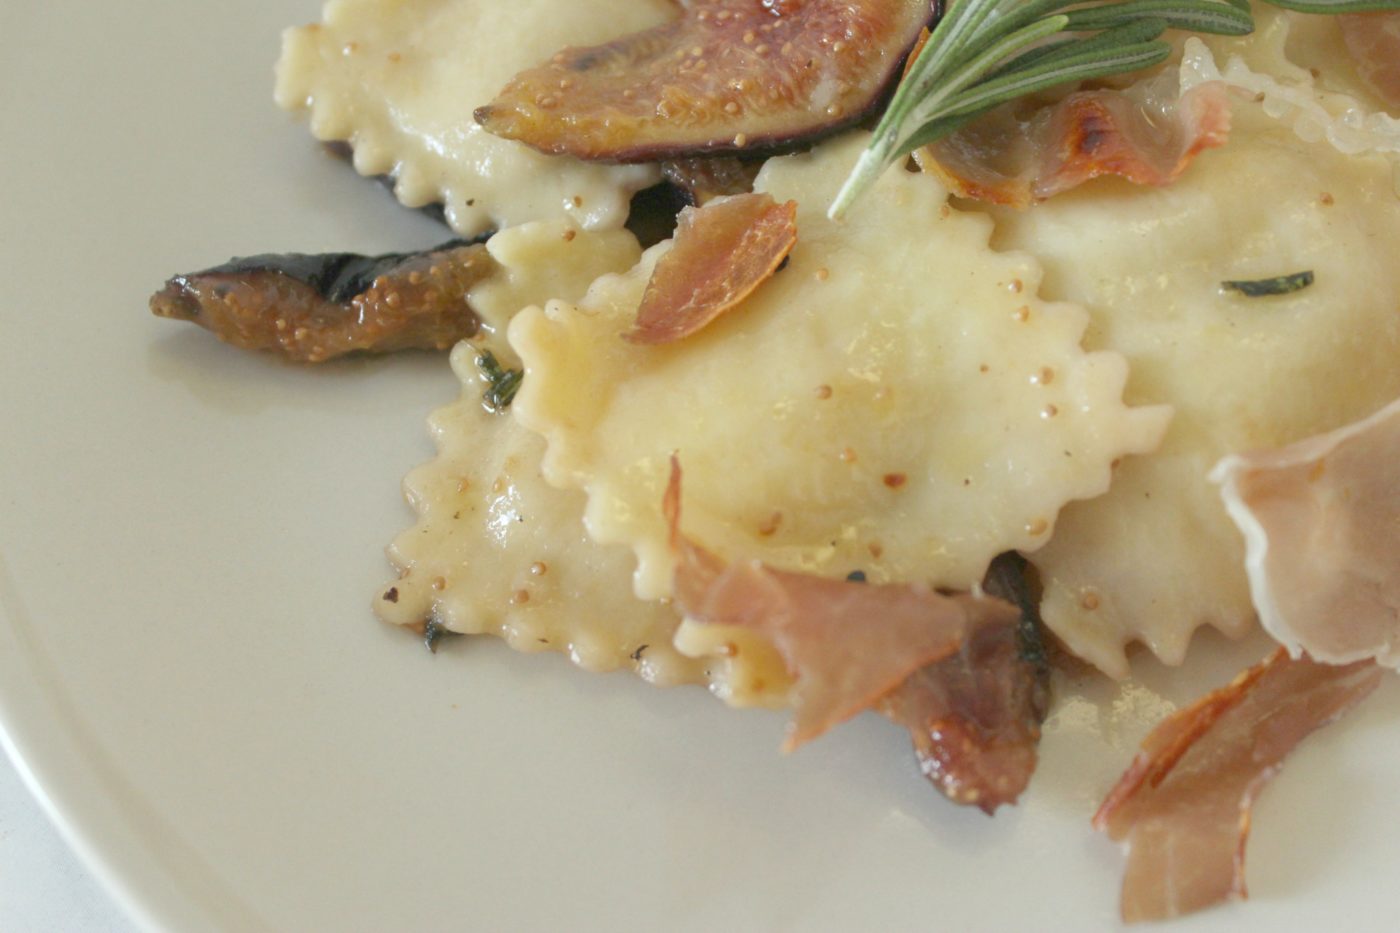 The best part of this dish is the crispy proscuitto that's crumbled on top. It adds a little texture and saltiness to the pasta.